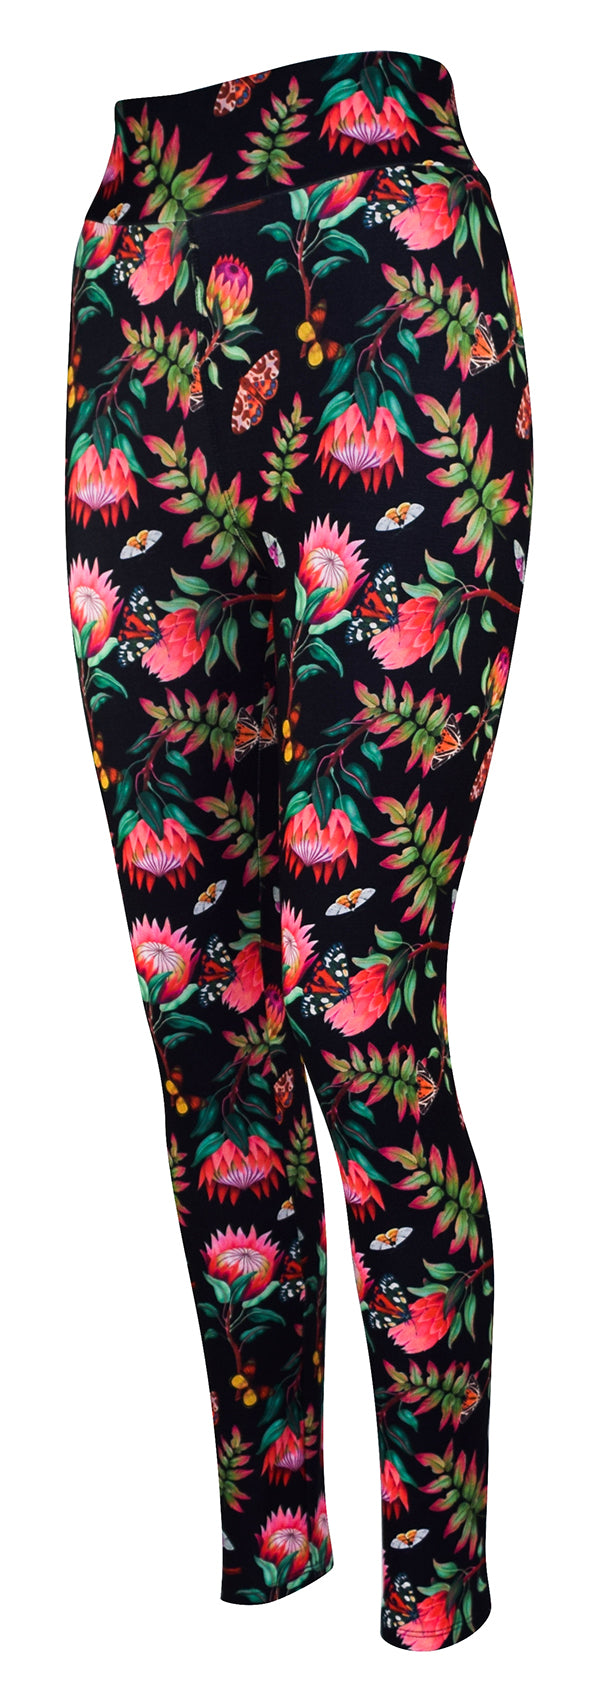 Butterfly Exotica-Adult Leggings